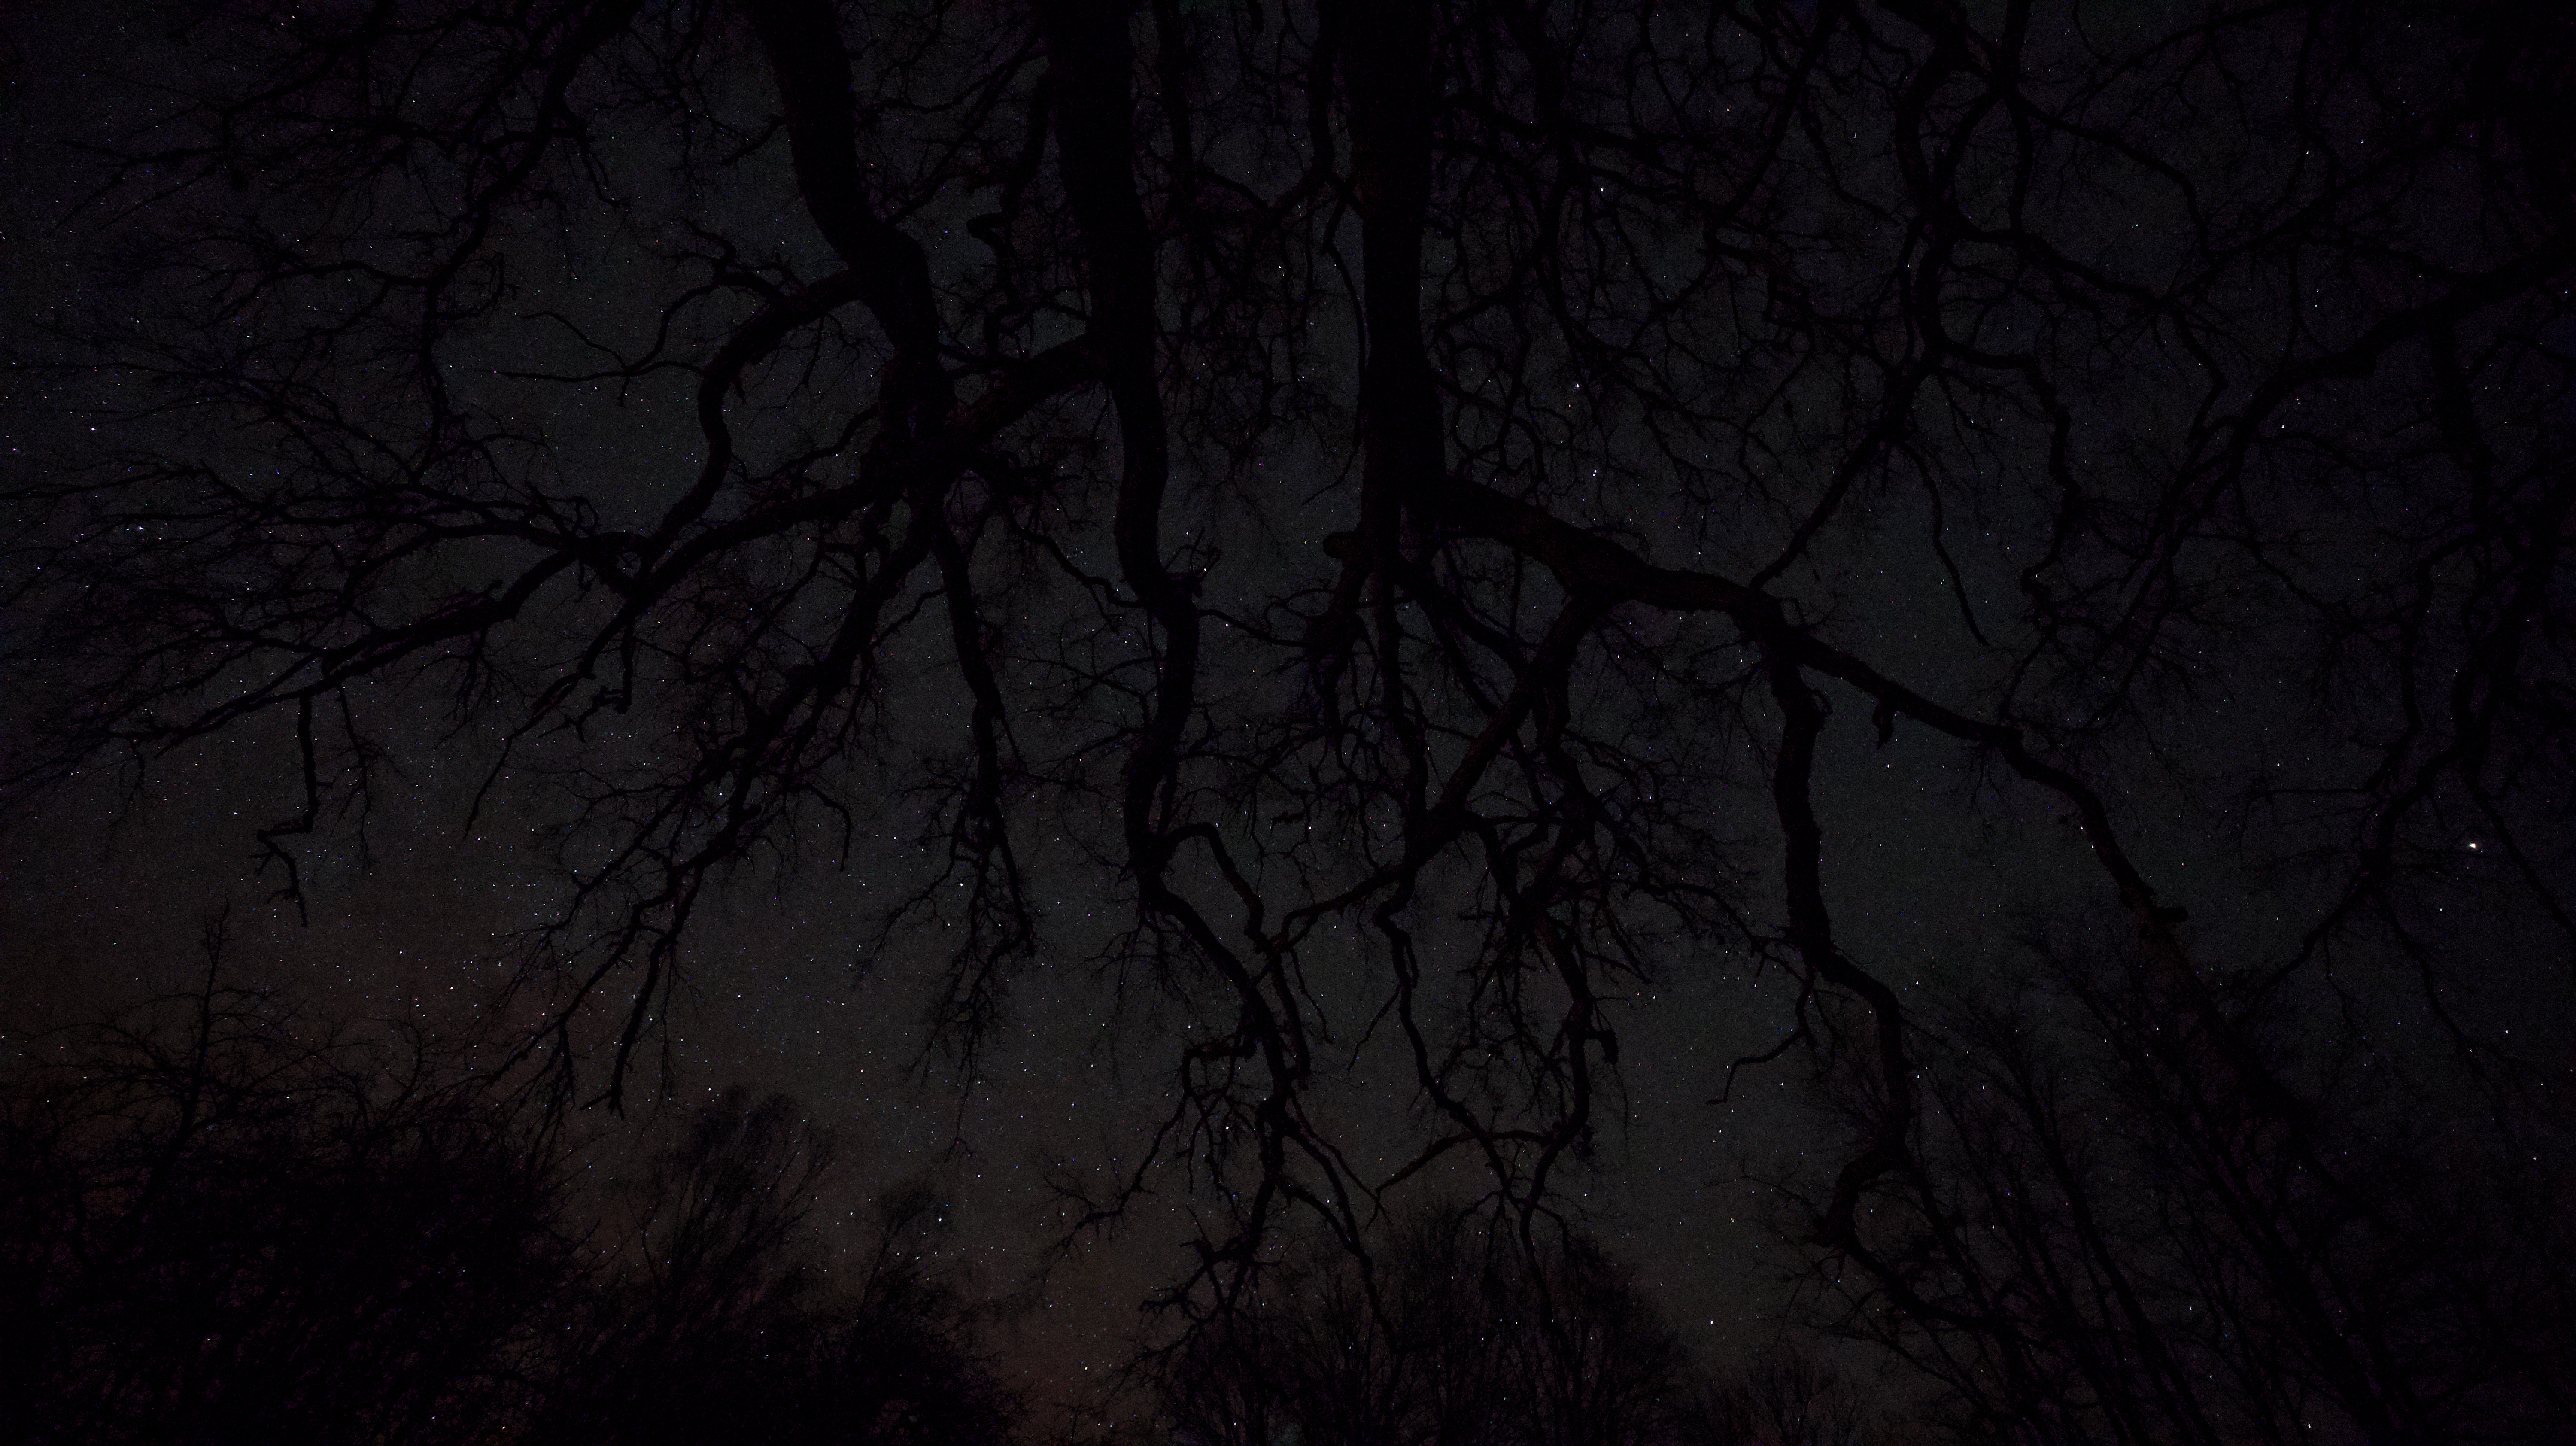 A starry sky seen through the branches of an old oak tree